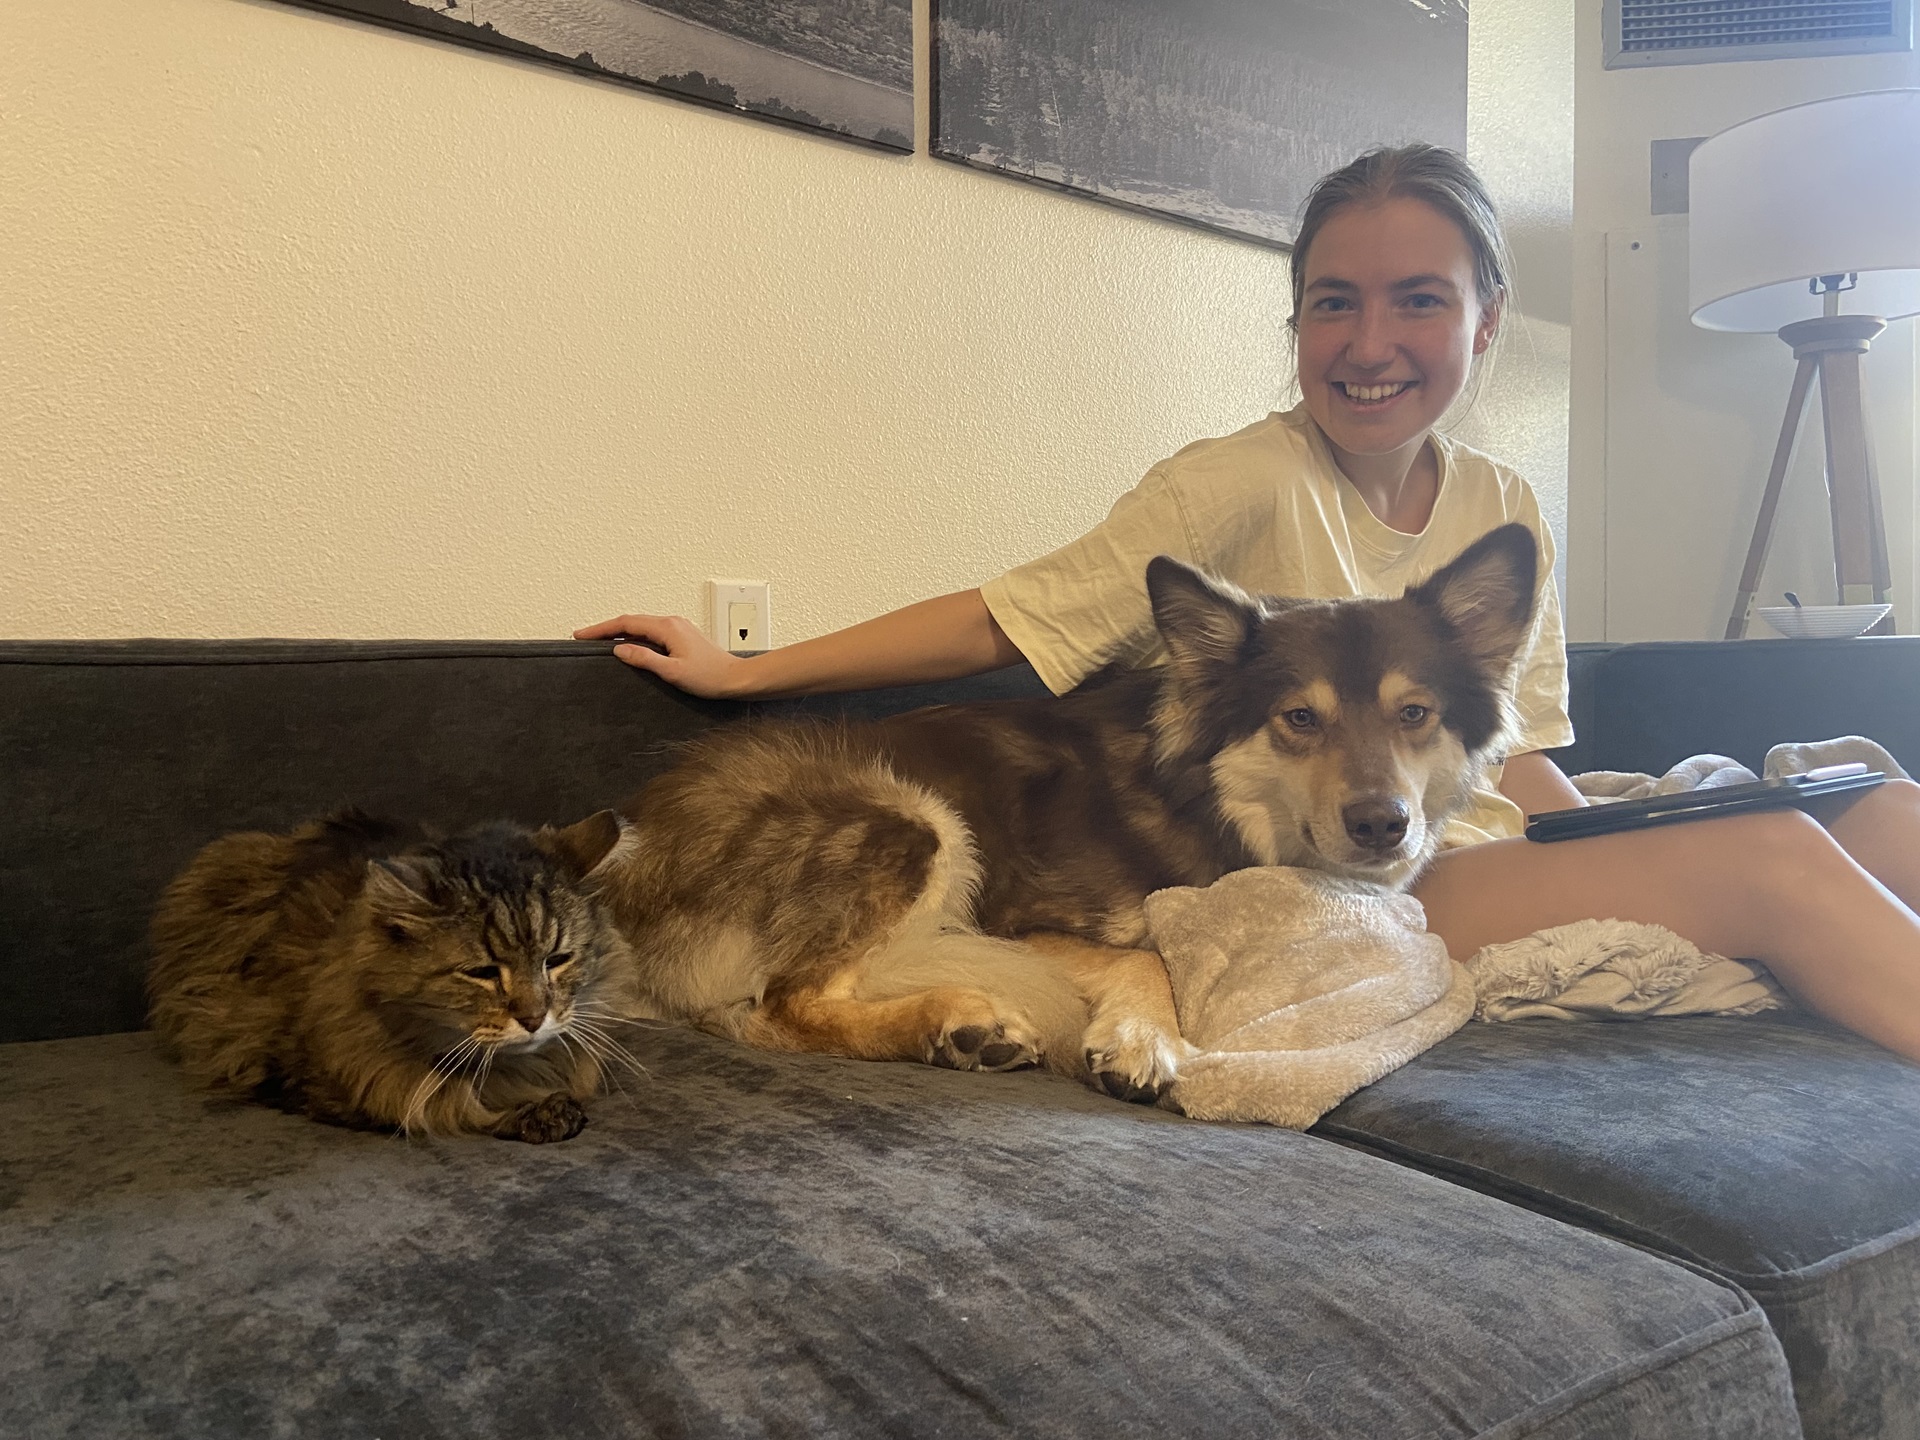 A tabby cat lays on a couch next to a dog and a woman